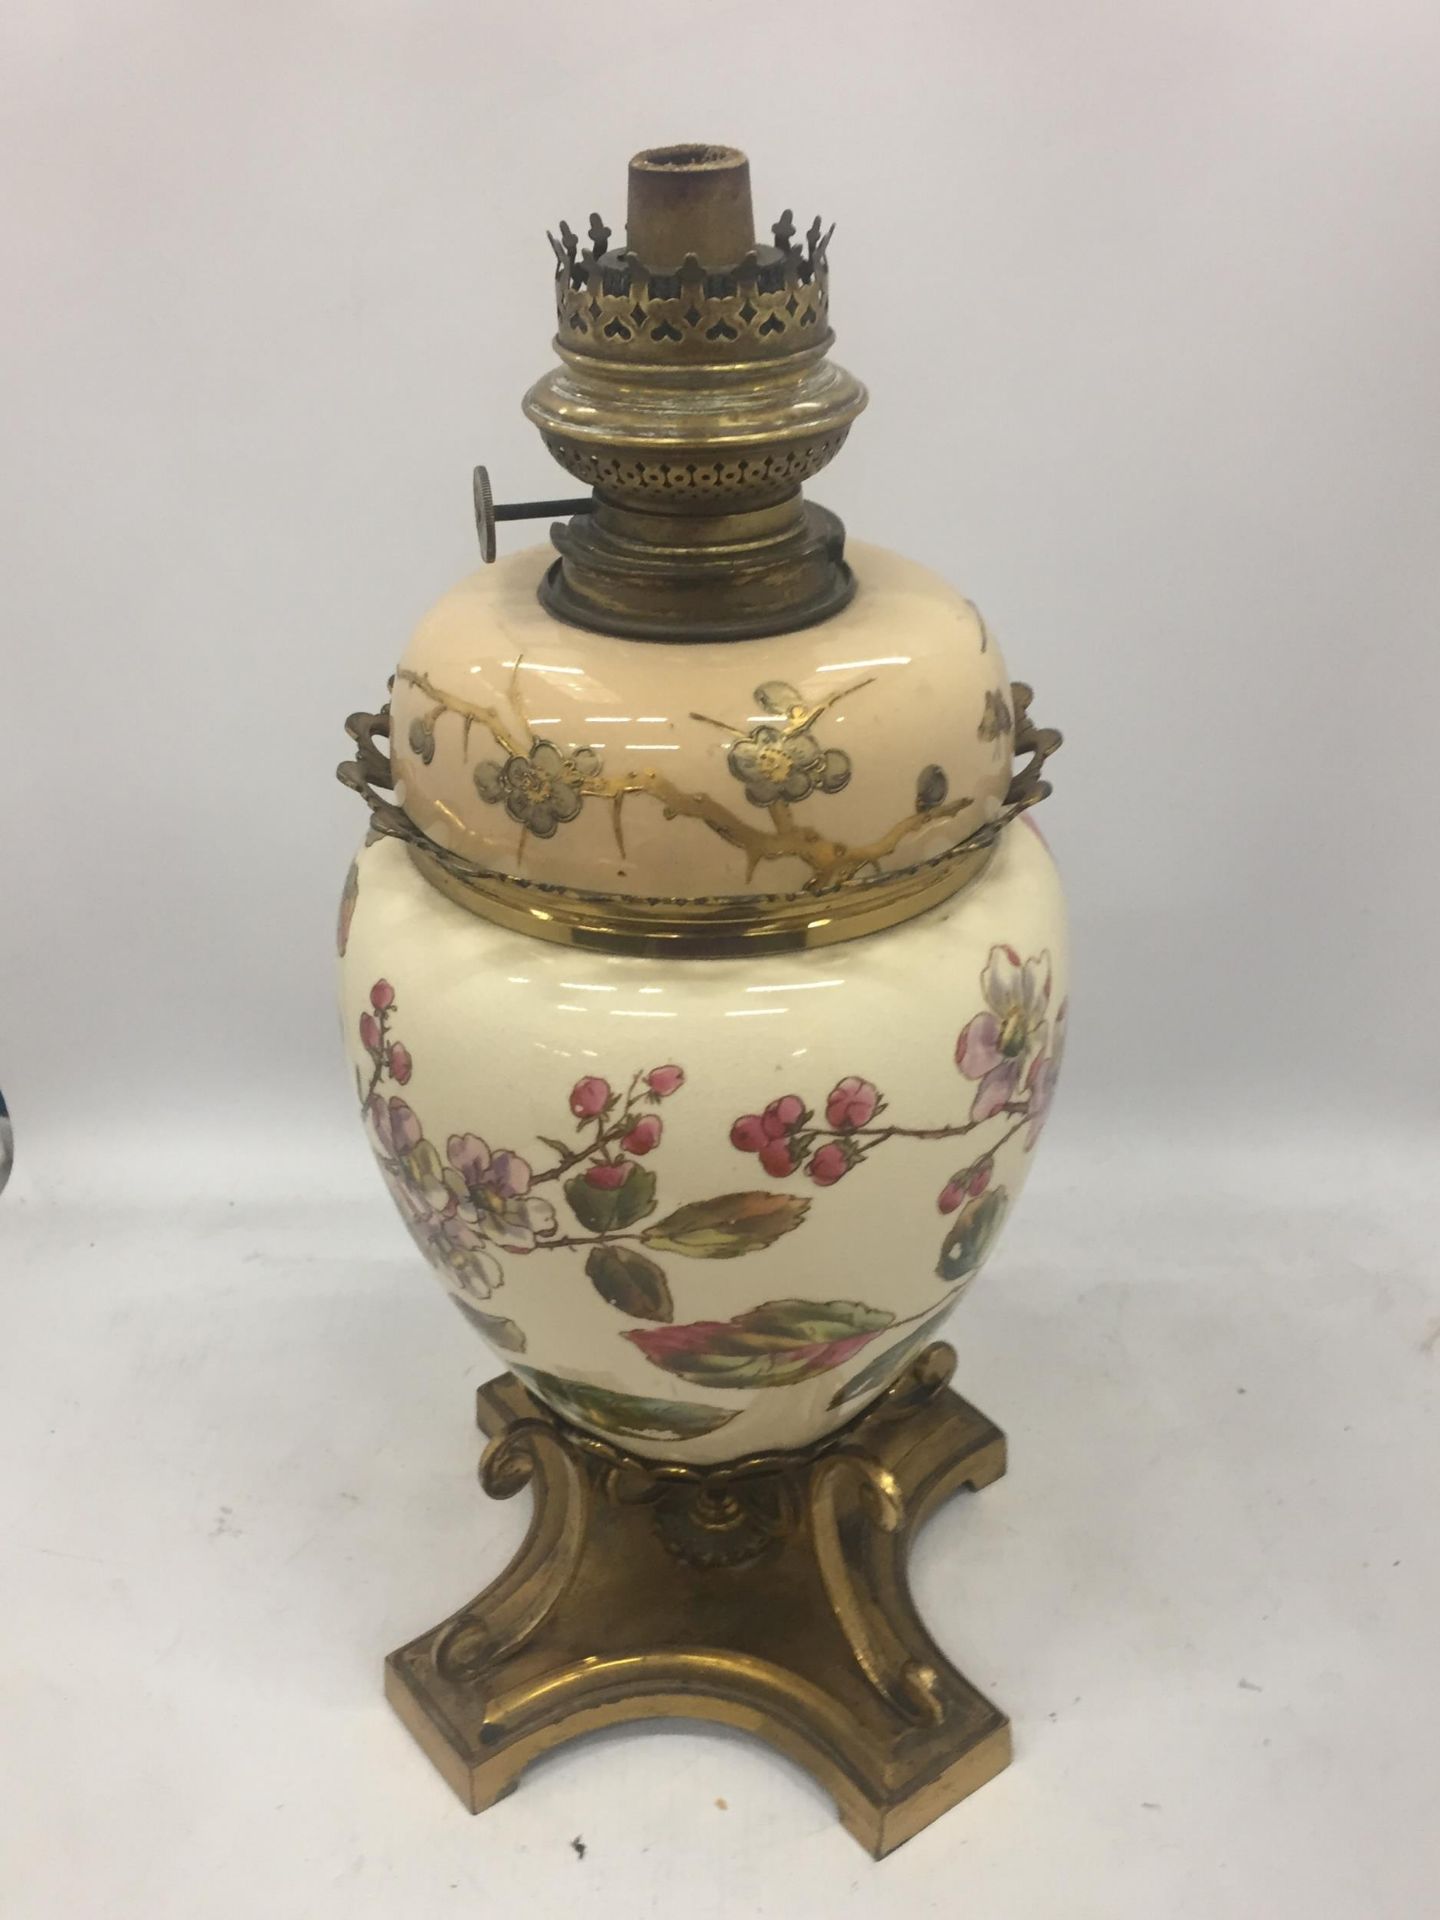 AN ANTIQUE CERAMIC AND BRASS OIL LAMP WITH FLORAL DESIGN